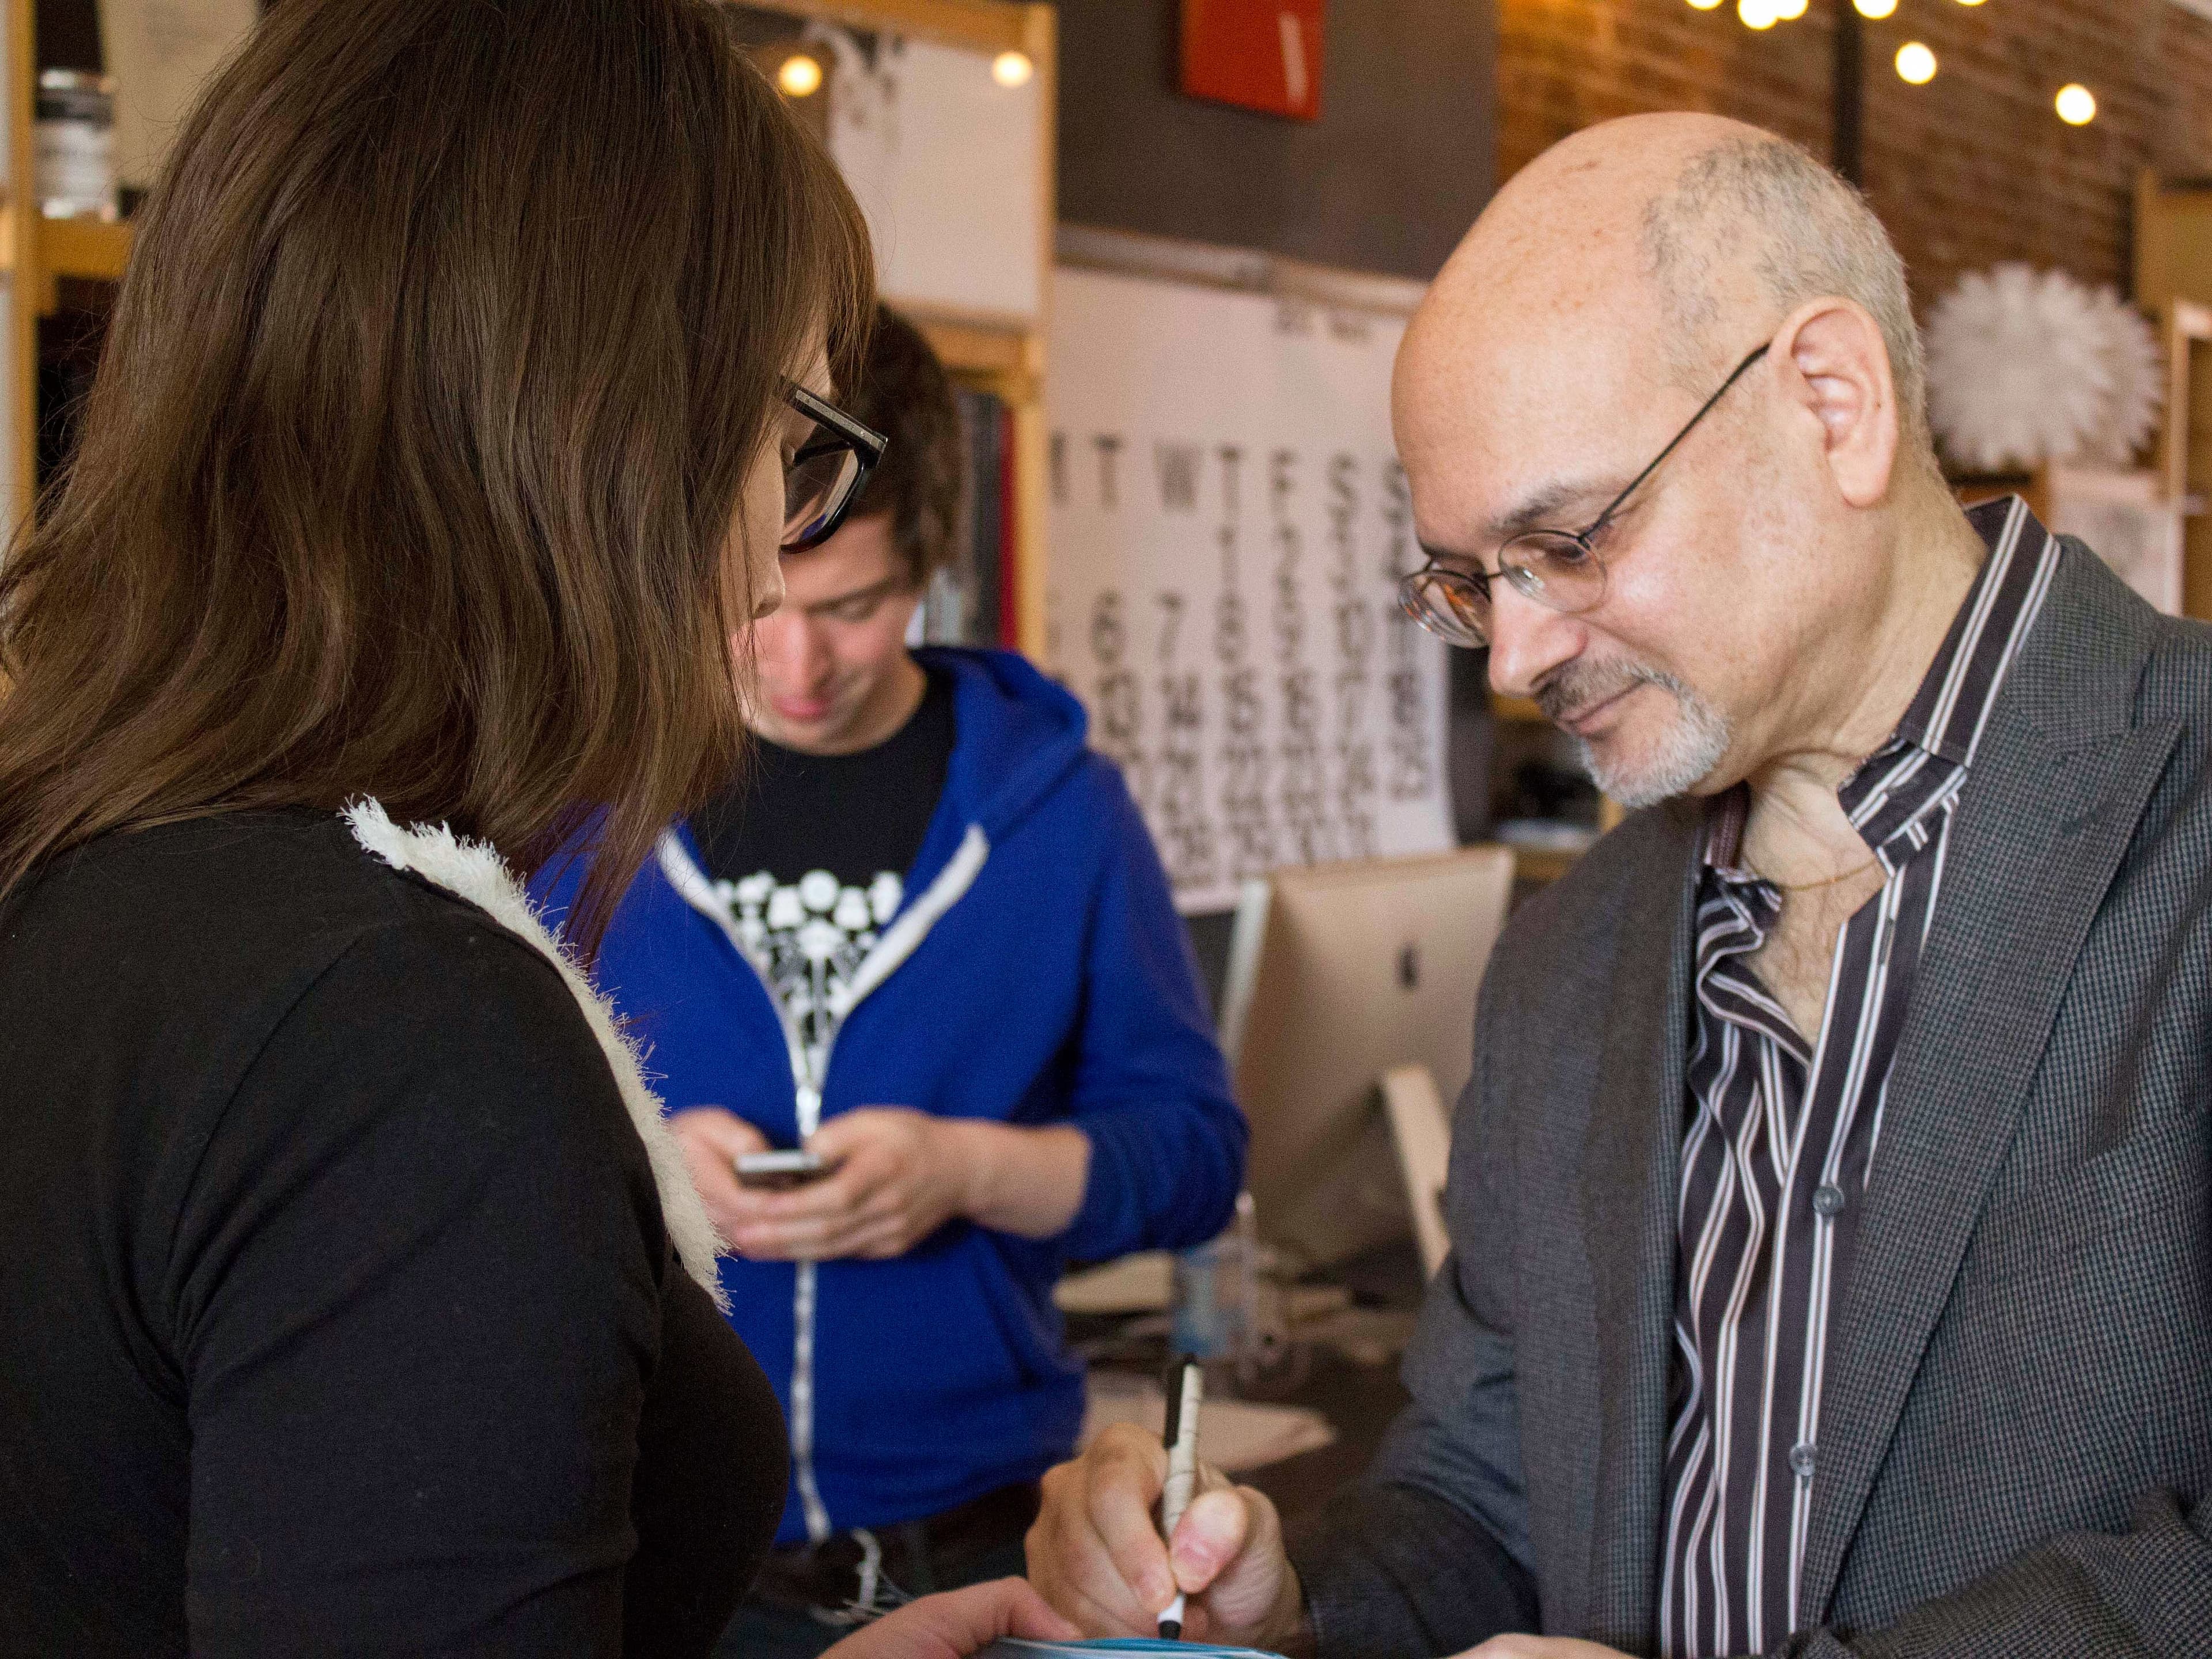 A man with glasses and a partially bald head is signing something for a woman. He is wearing a striped shirt and a blazer. The woman, with long brown hair, faces him. In the background, a younger man in a blue hoodie is looking down, using his phone.